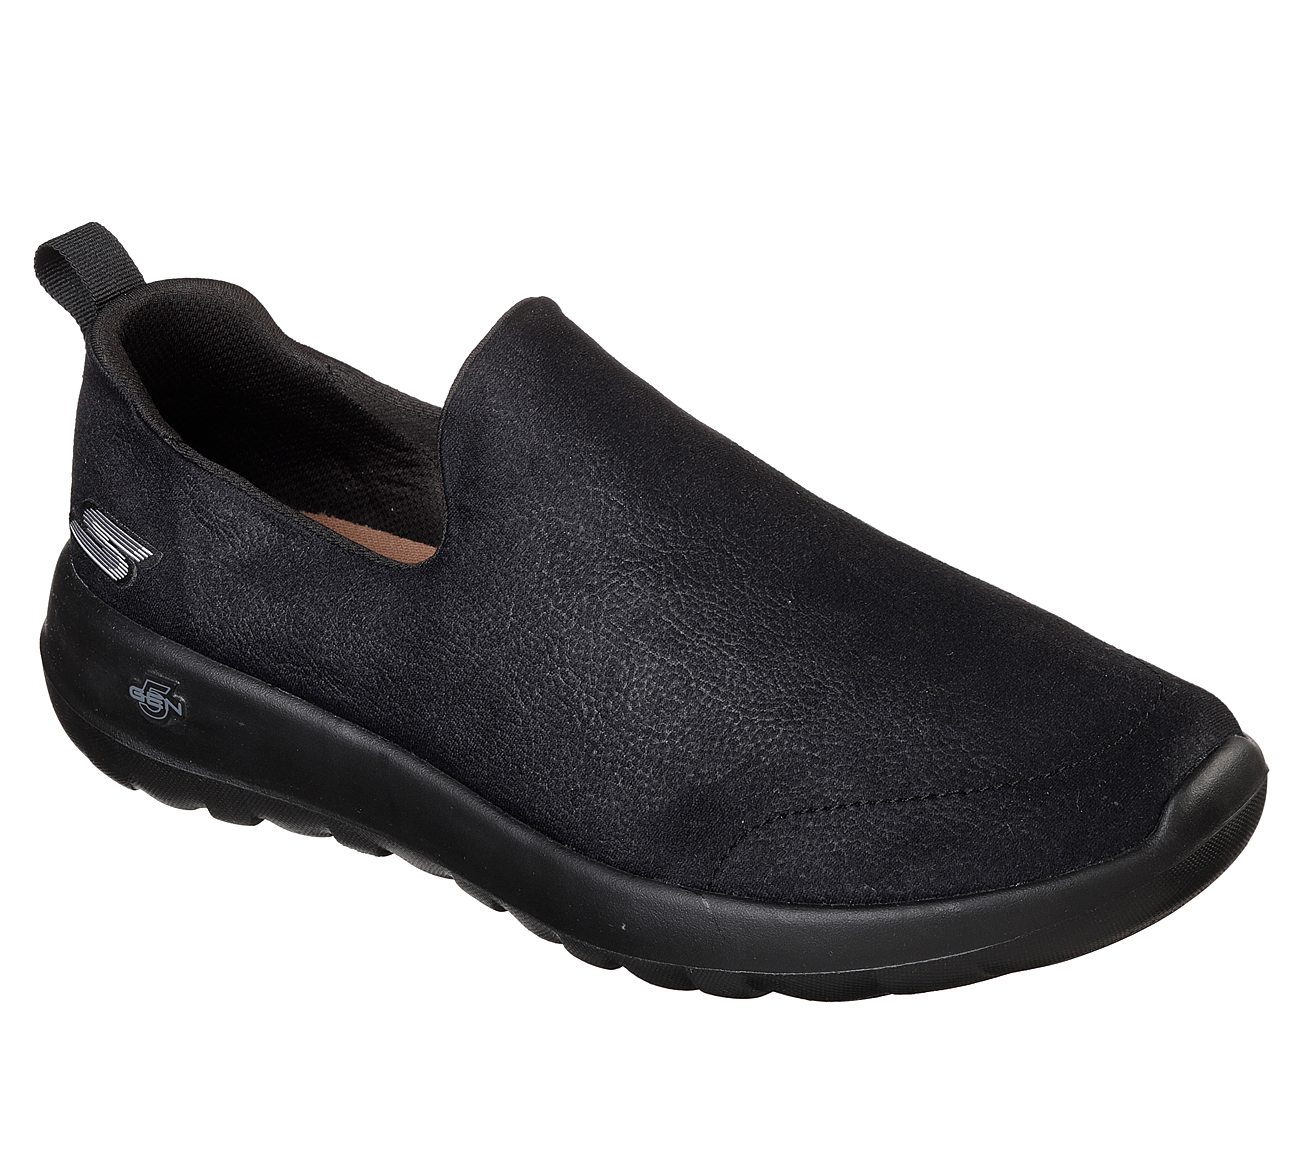 skechers go walk shoes skechers gowalk max - escalate. $54.00. write the first review. hover to LKBTGXK